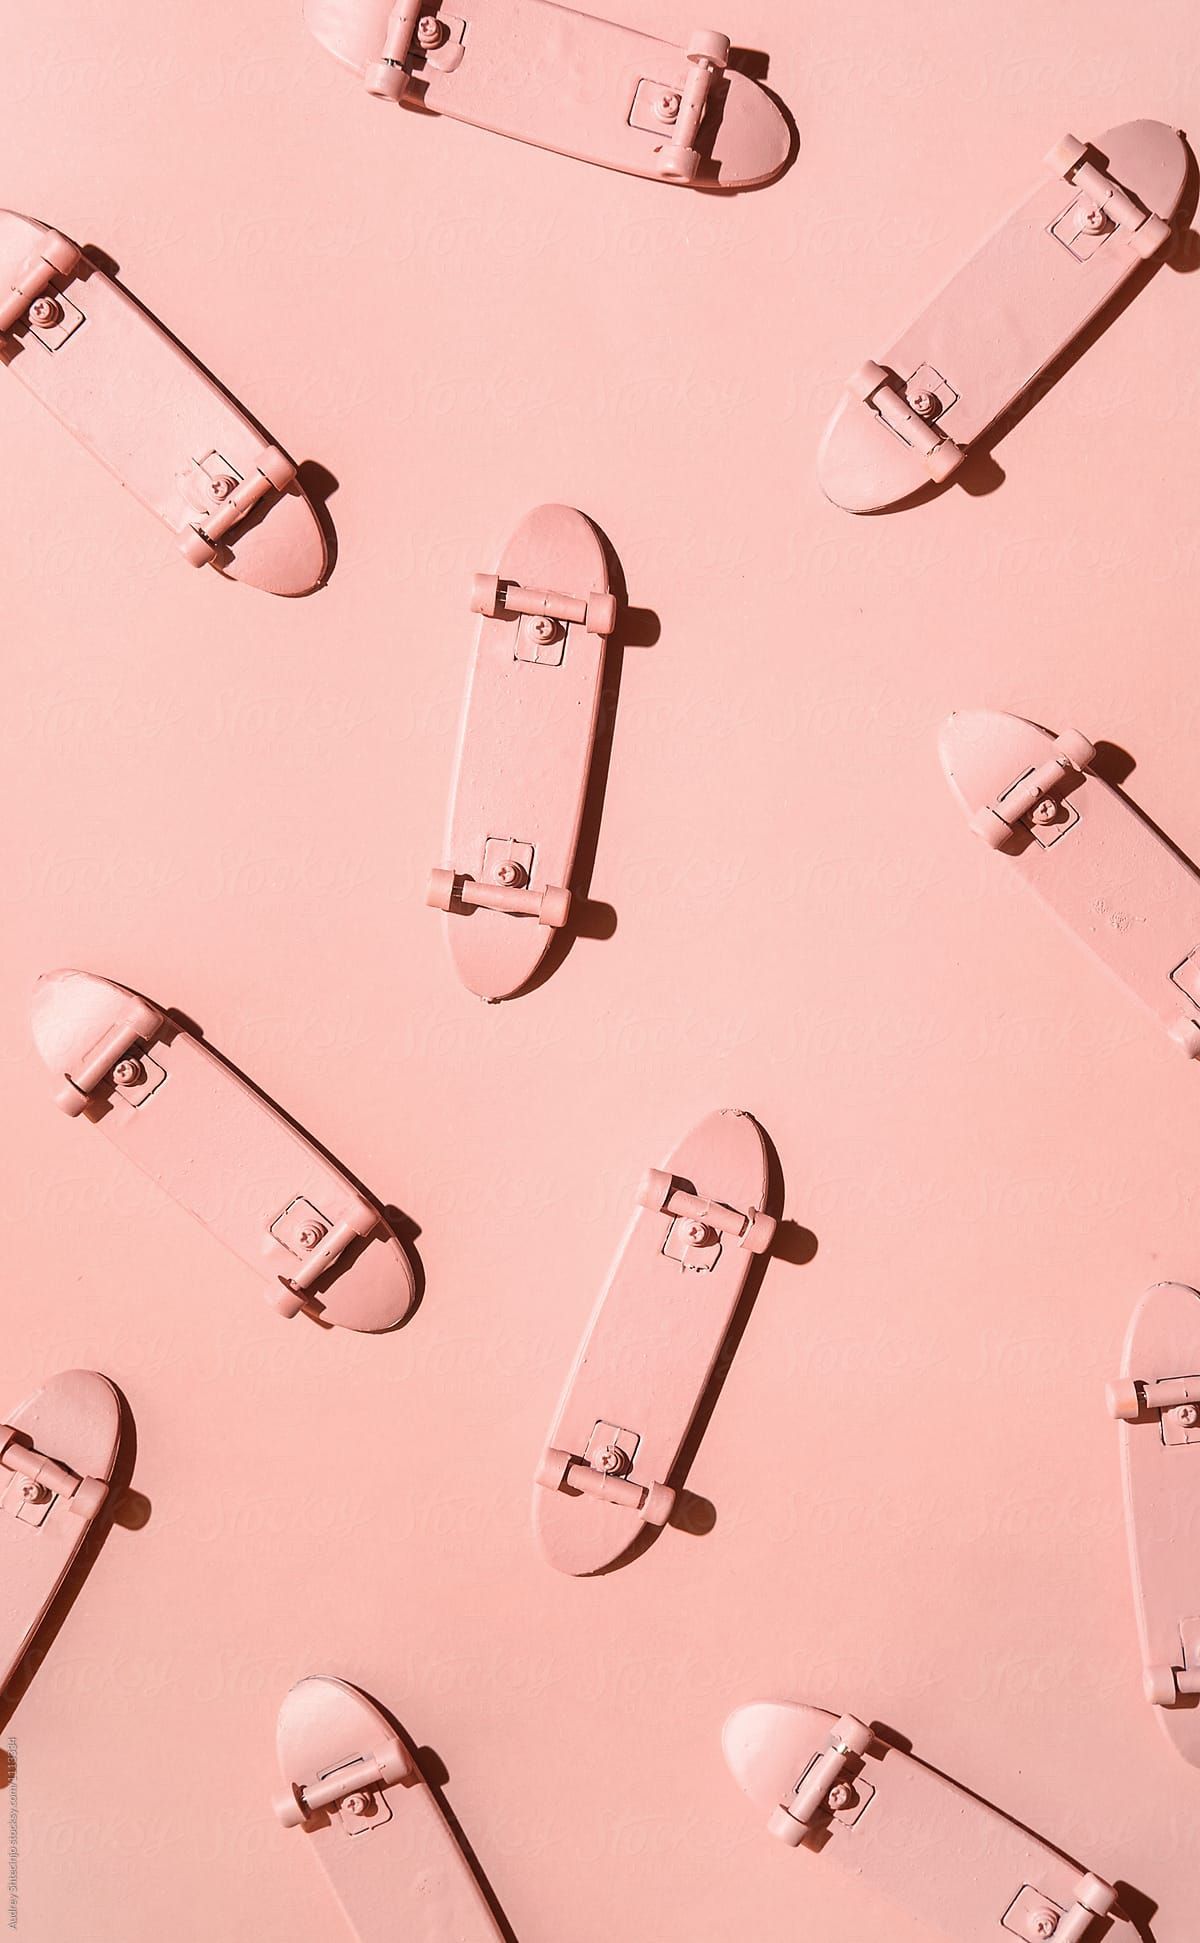 Pink skateboards on pink background by Audrey Shtecinjo for Stocksy United. Skateboard picture, Pink photography, Pastel pink aesthetic